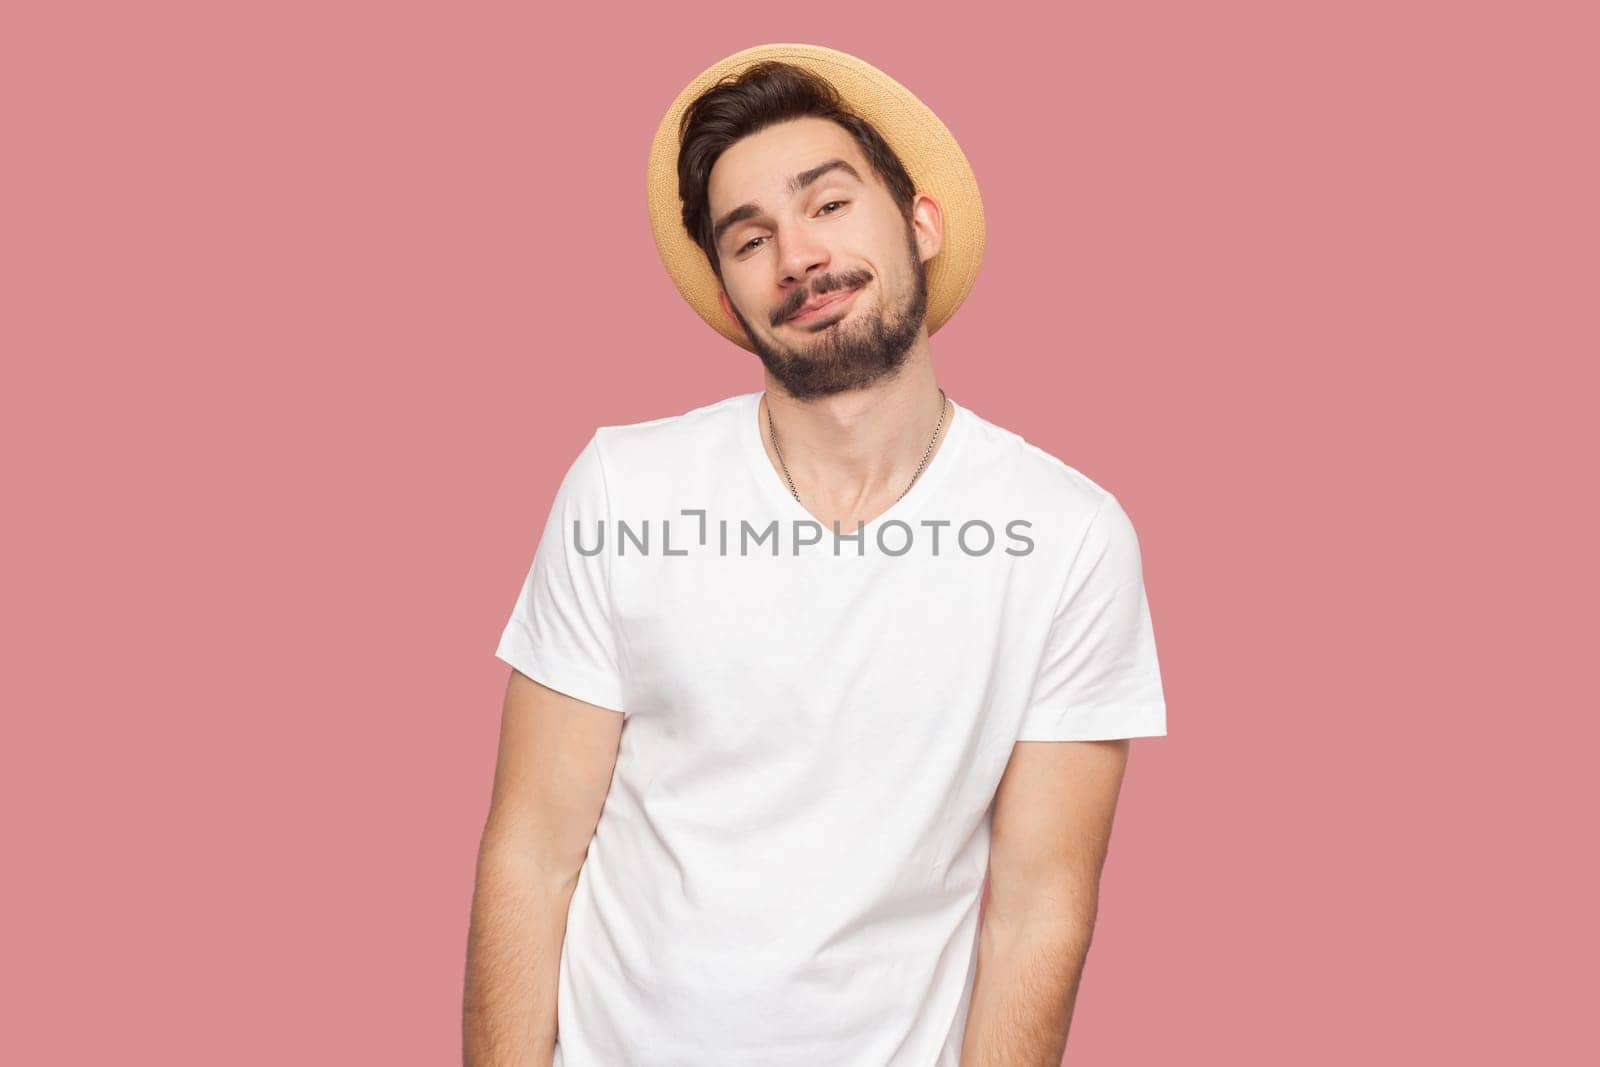 Portrait of cool self-confident smiling bearded man in white T-shirt and hat standing looking at camera, having satisfied expression. Indoor studio shot isolated on pink background.